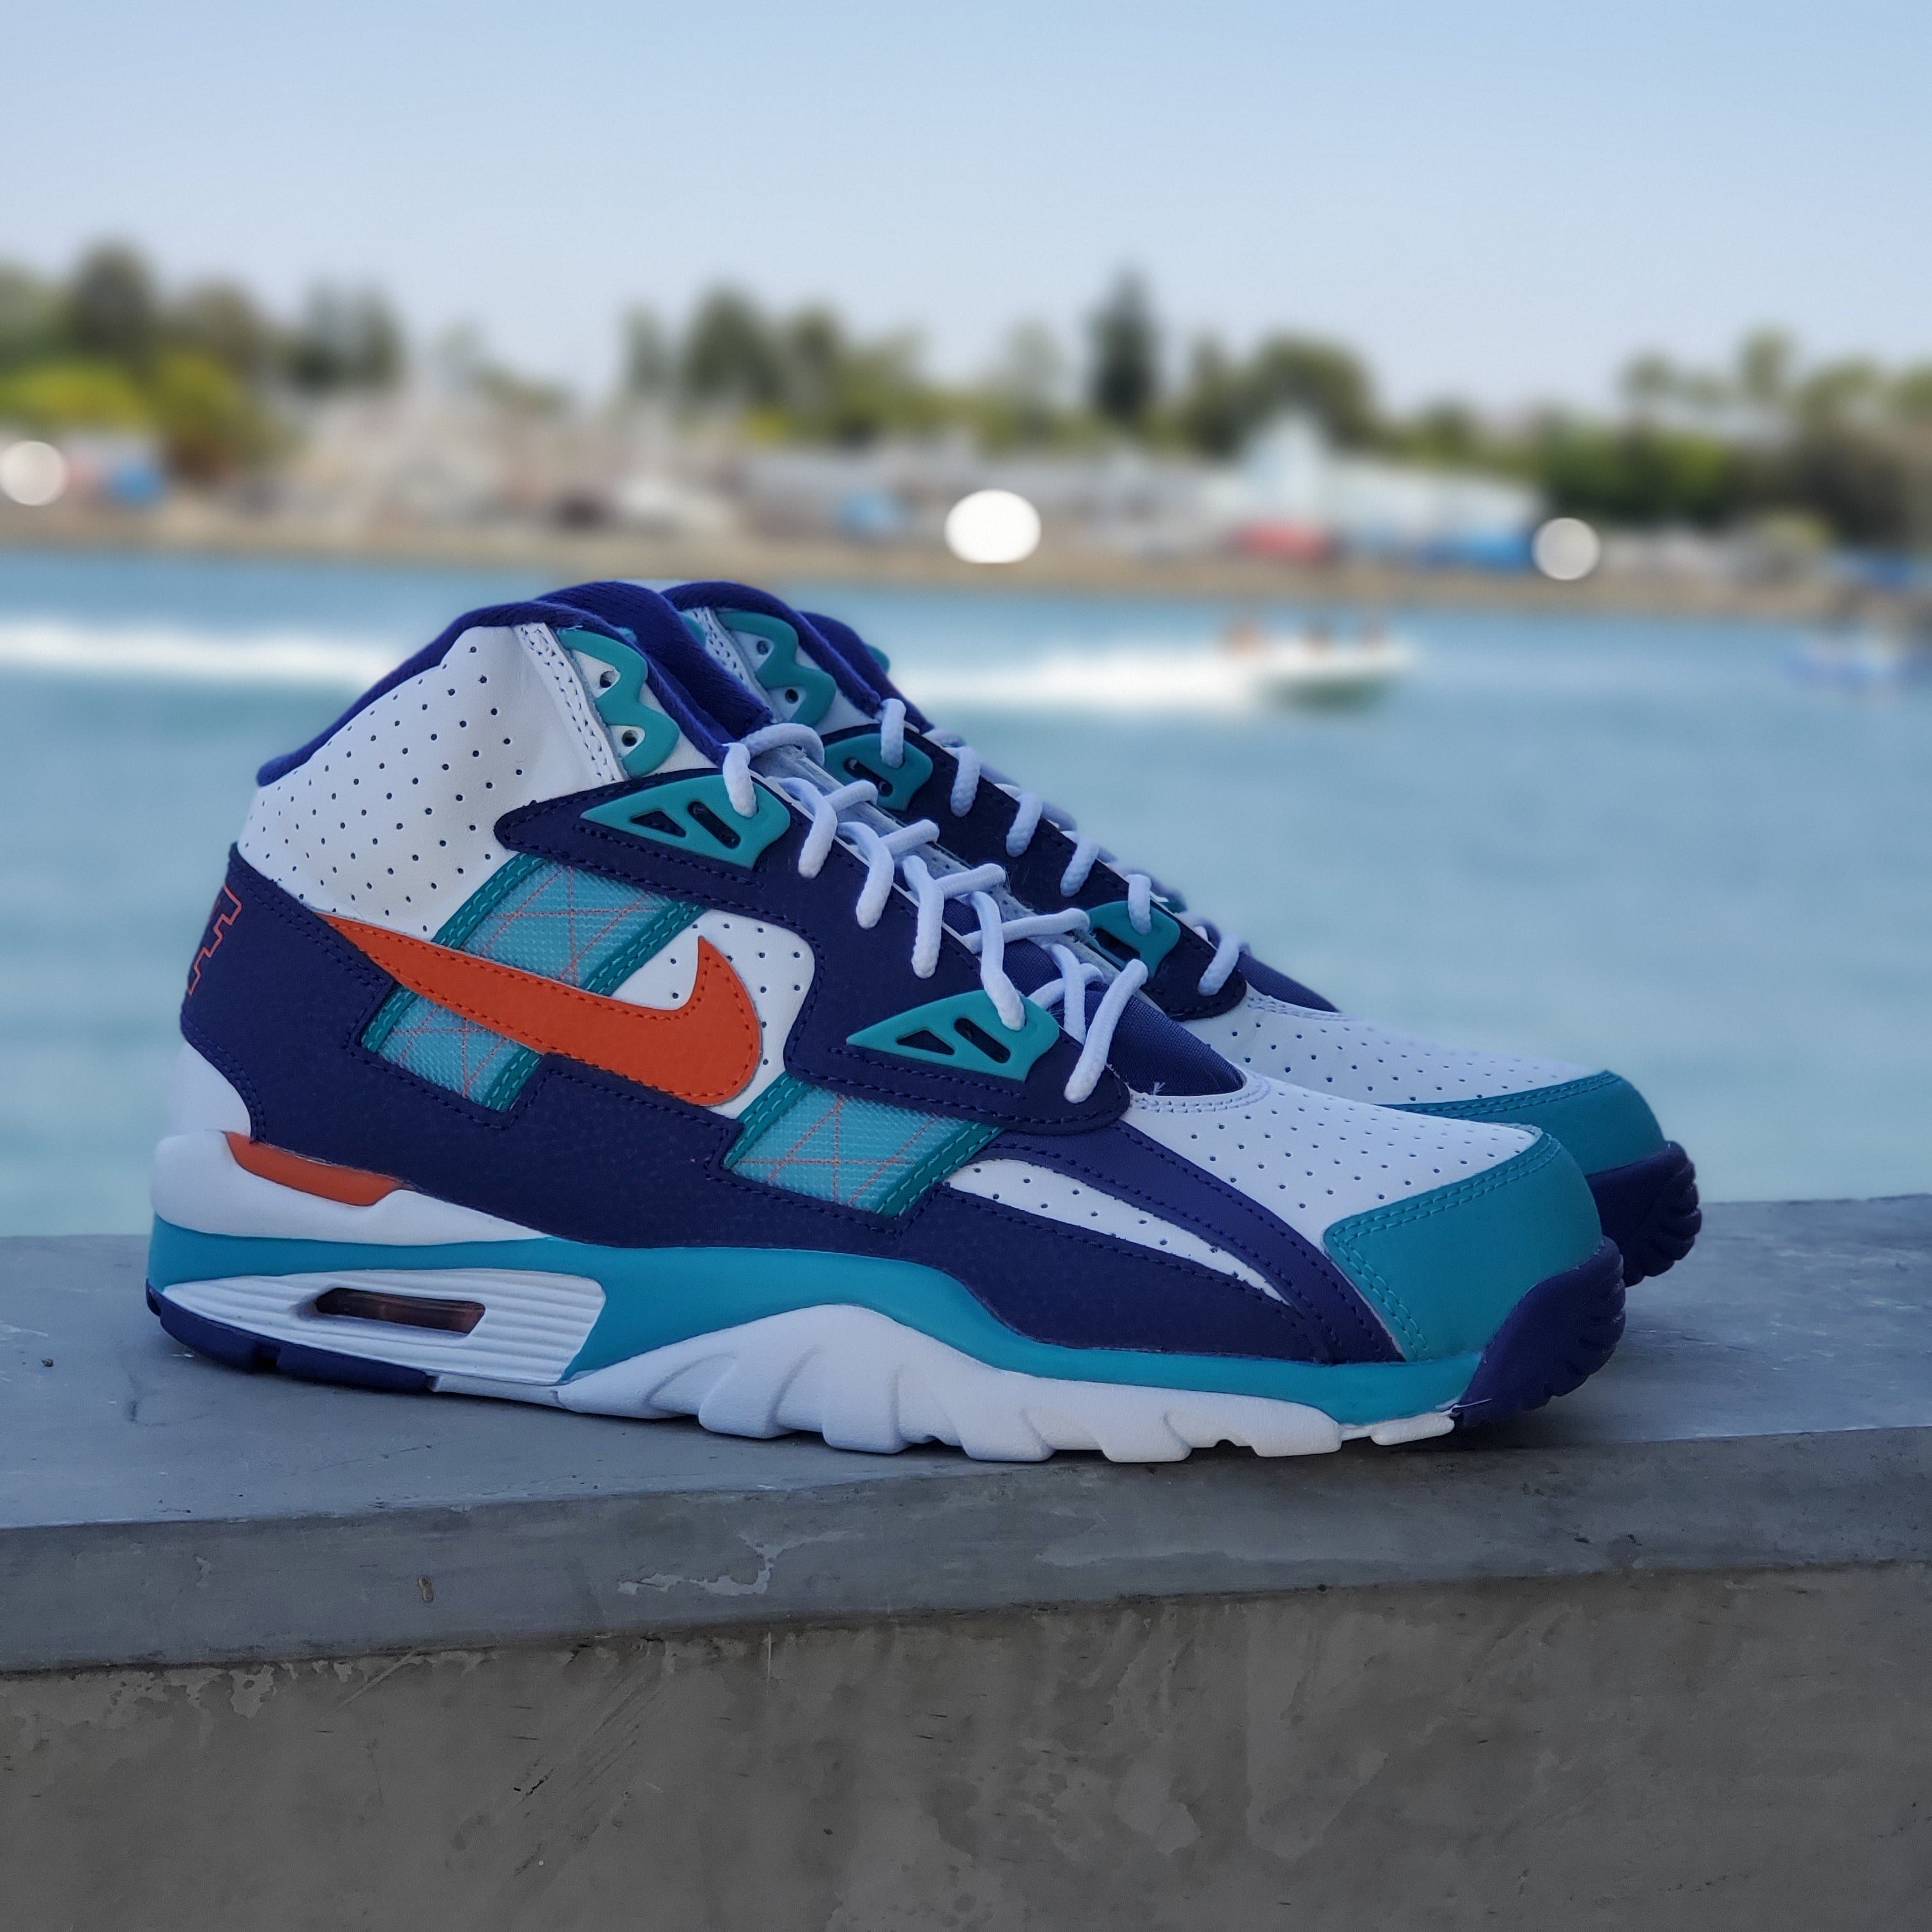 miami dolphins shoes for sale